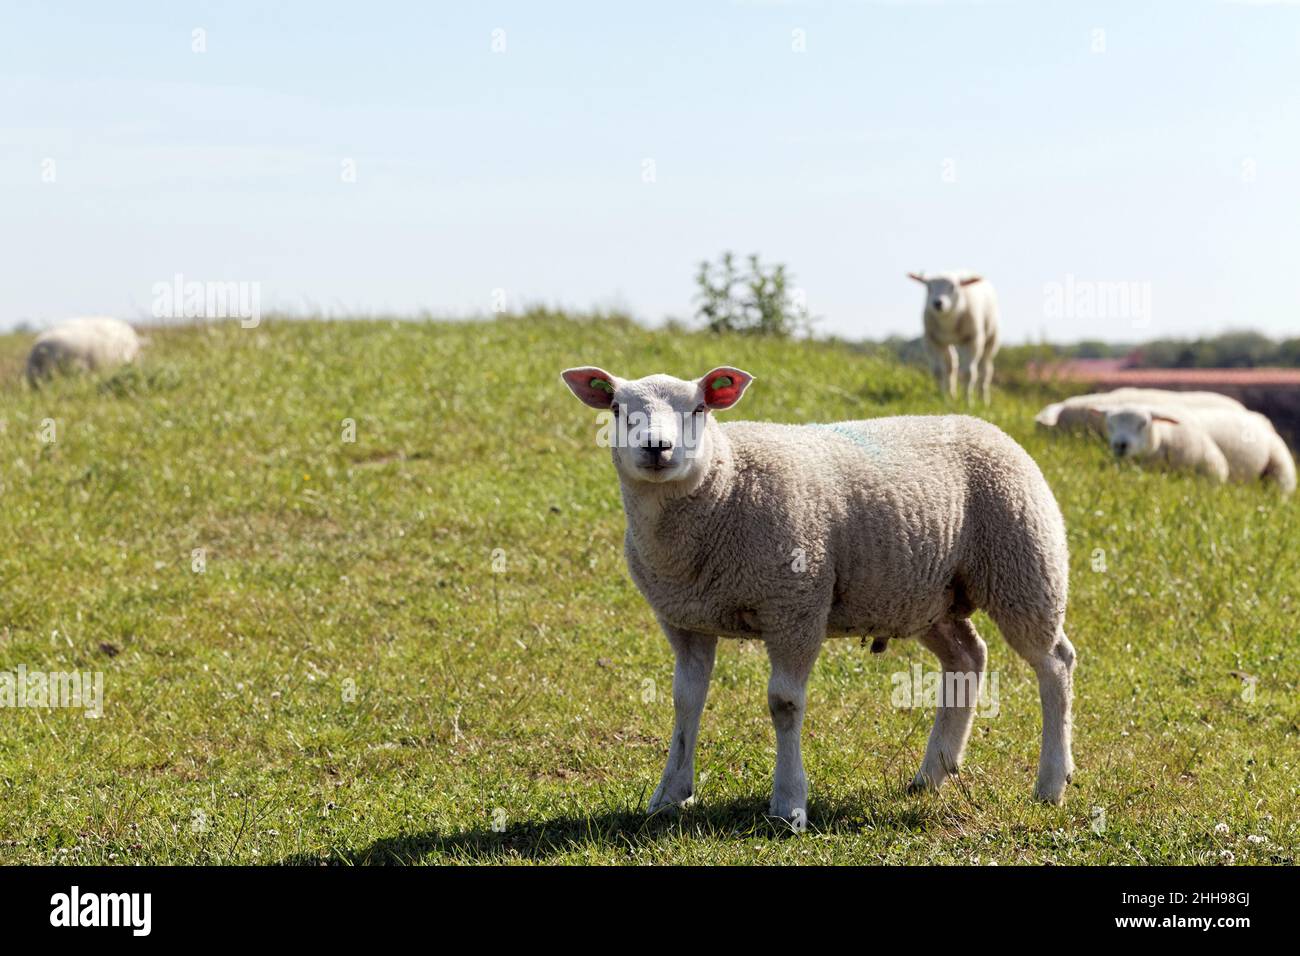 A curious frightened sheep looking at the camera while urinating, Texel, Netherlands Stock Photo